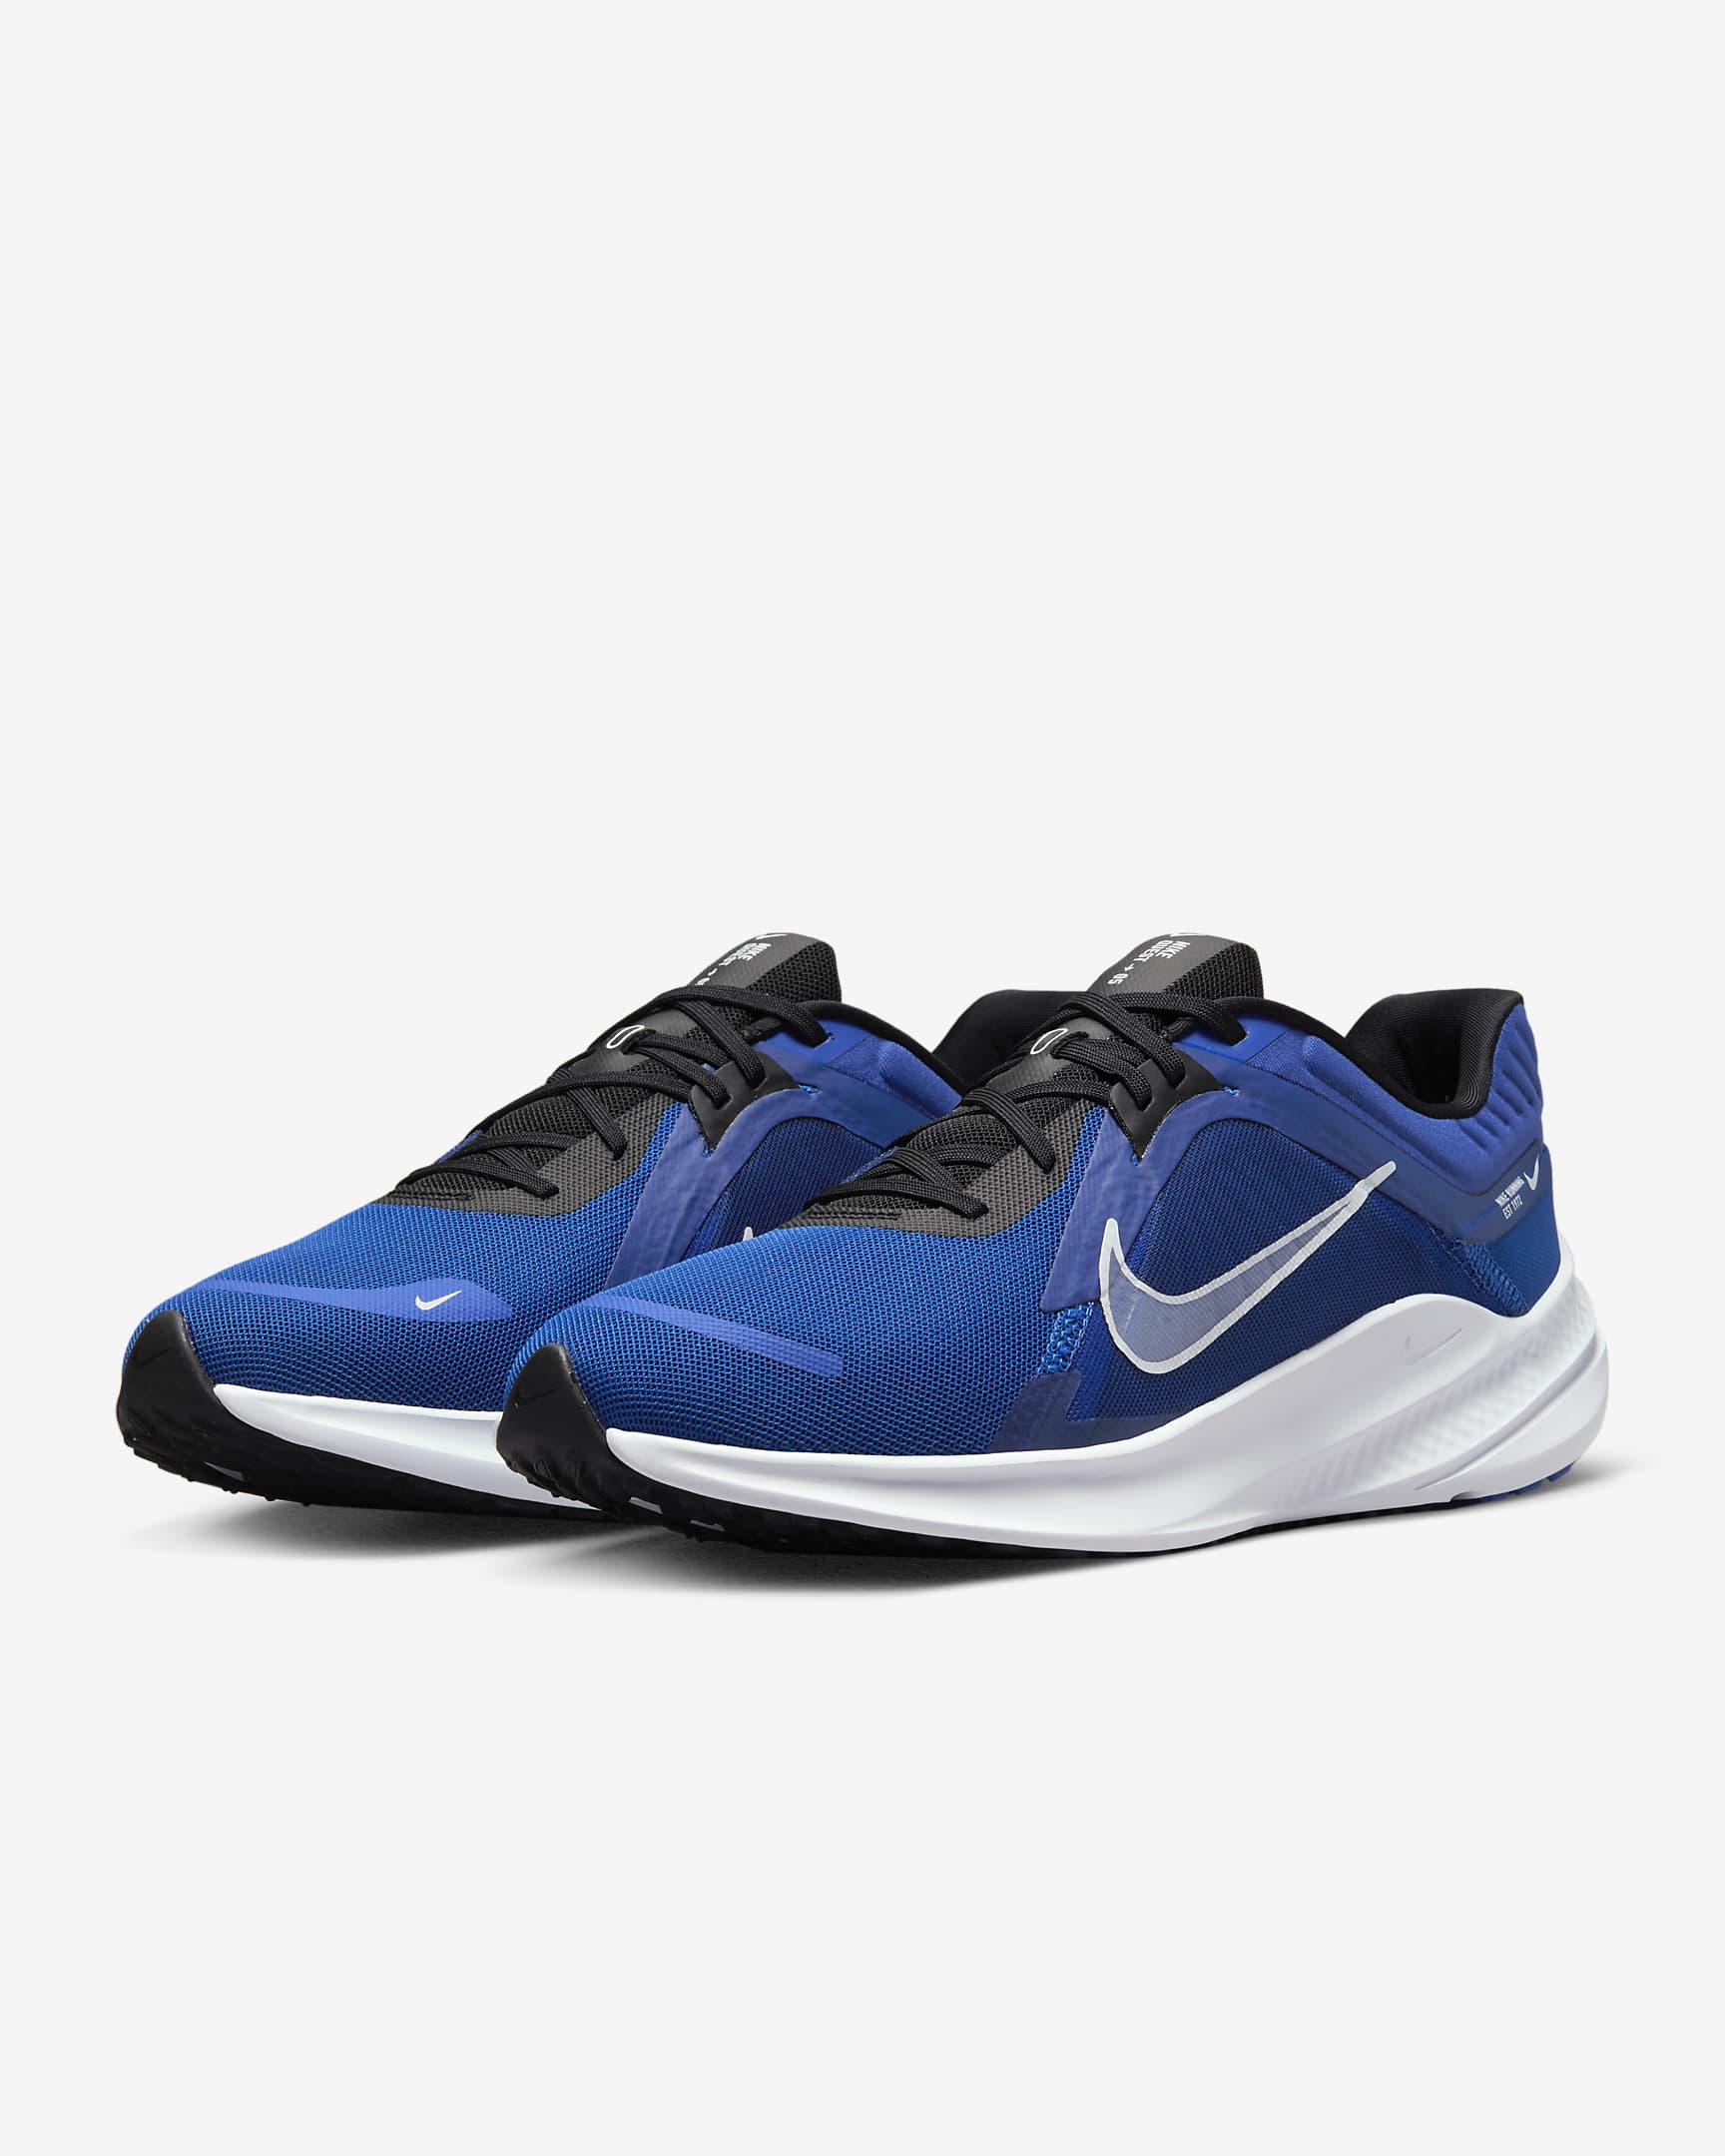 Nike Men's Quest 5 Road Running Shoes (Blue, size 6-15) $48, (Brown, size 8-14) $50 + Free Shipping